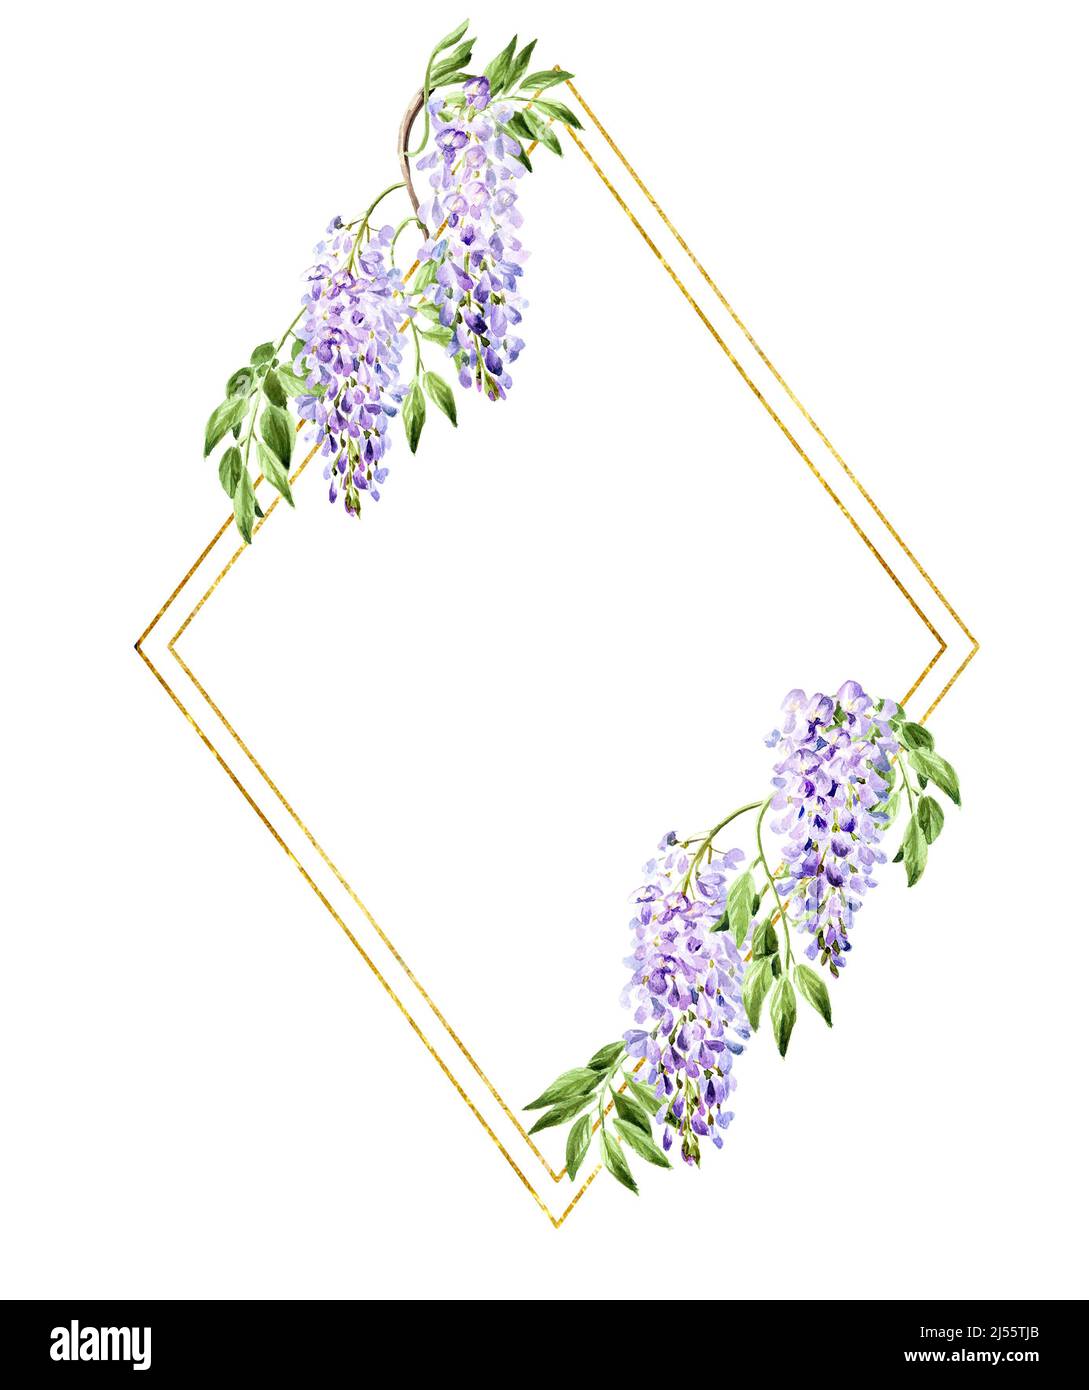 Wisteria  flower card,  Hand drawn watercolor  illustration isolated on white background Stock Photo